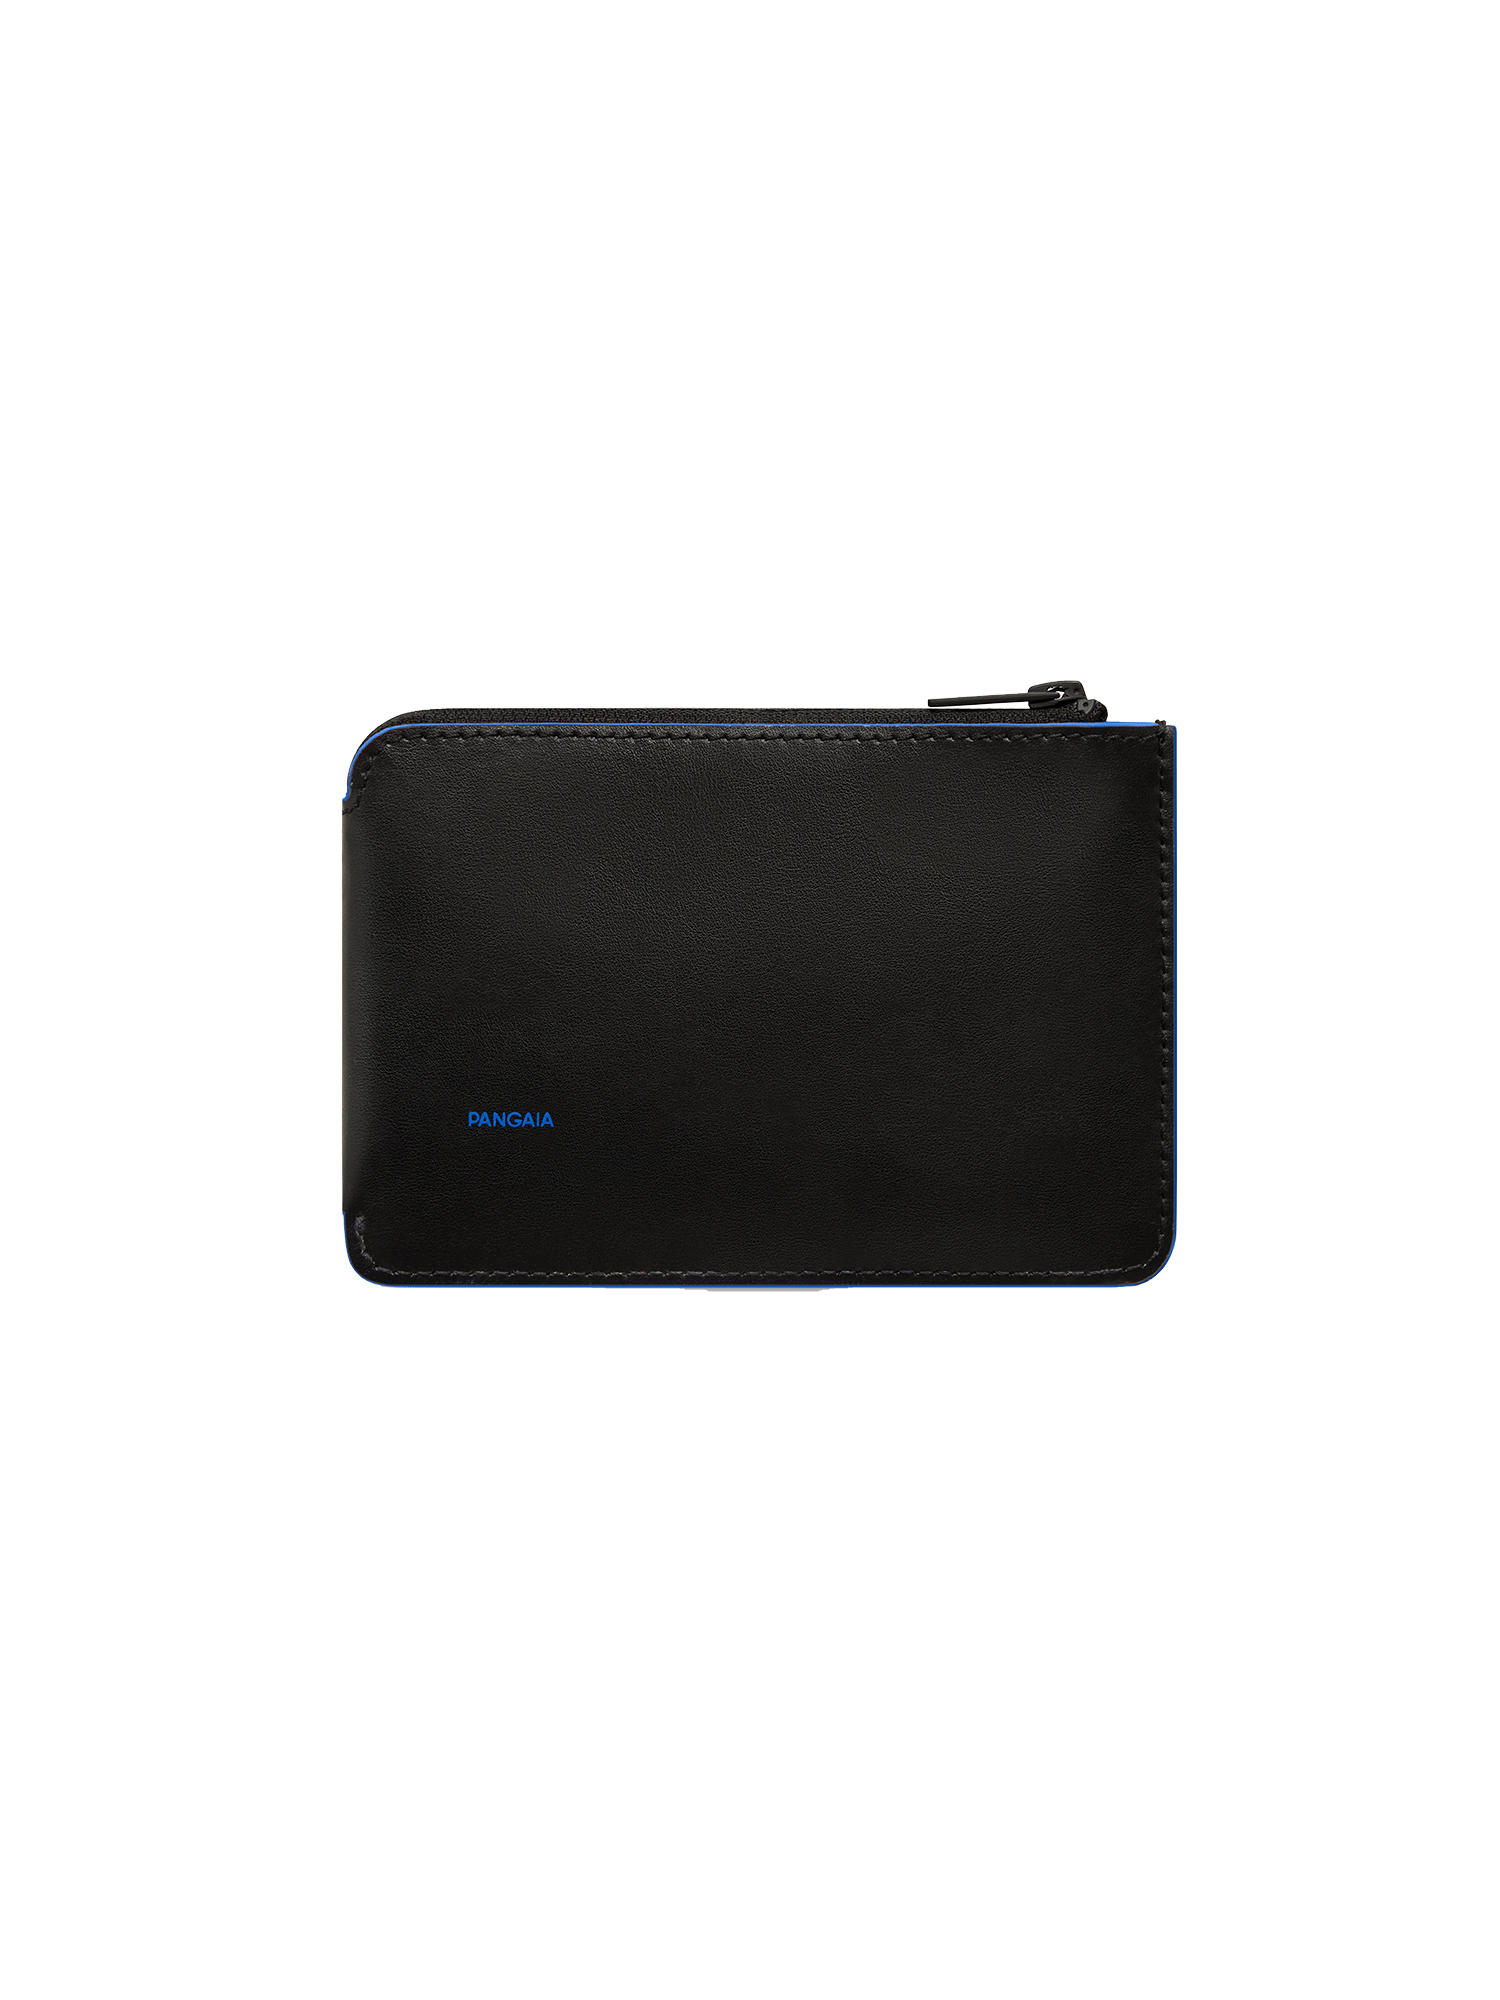 PANGAIA - Biobased Wallet — Cobalt Blue One Size